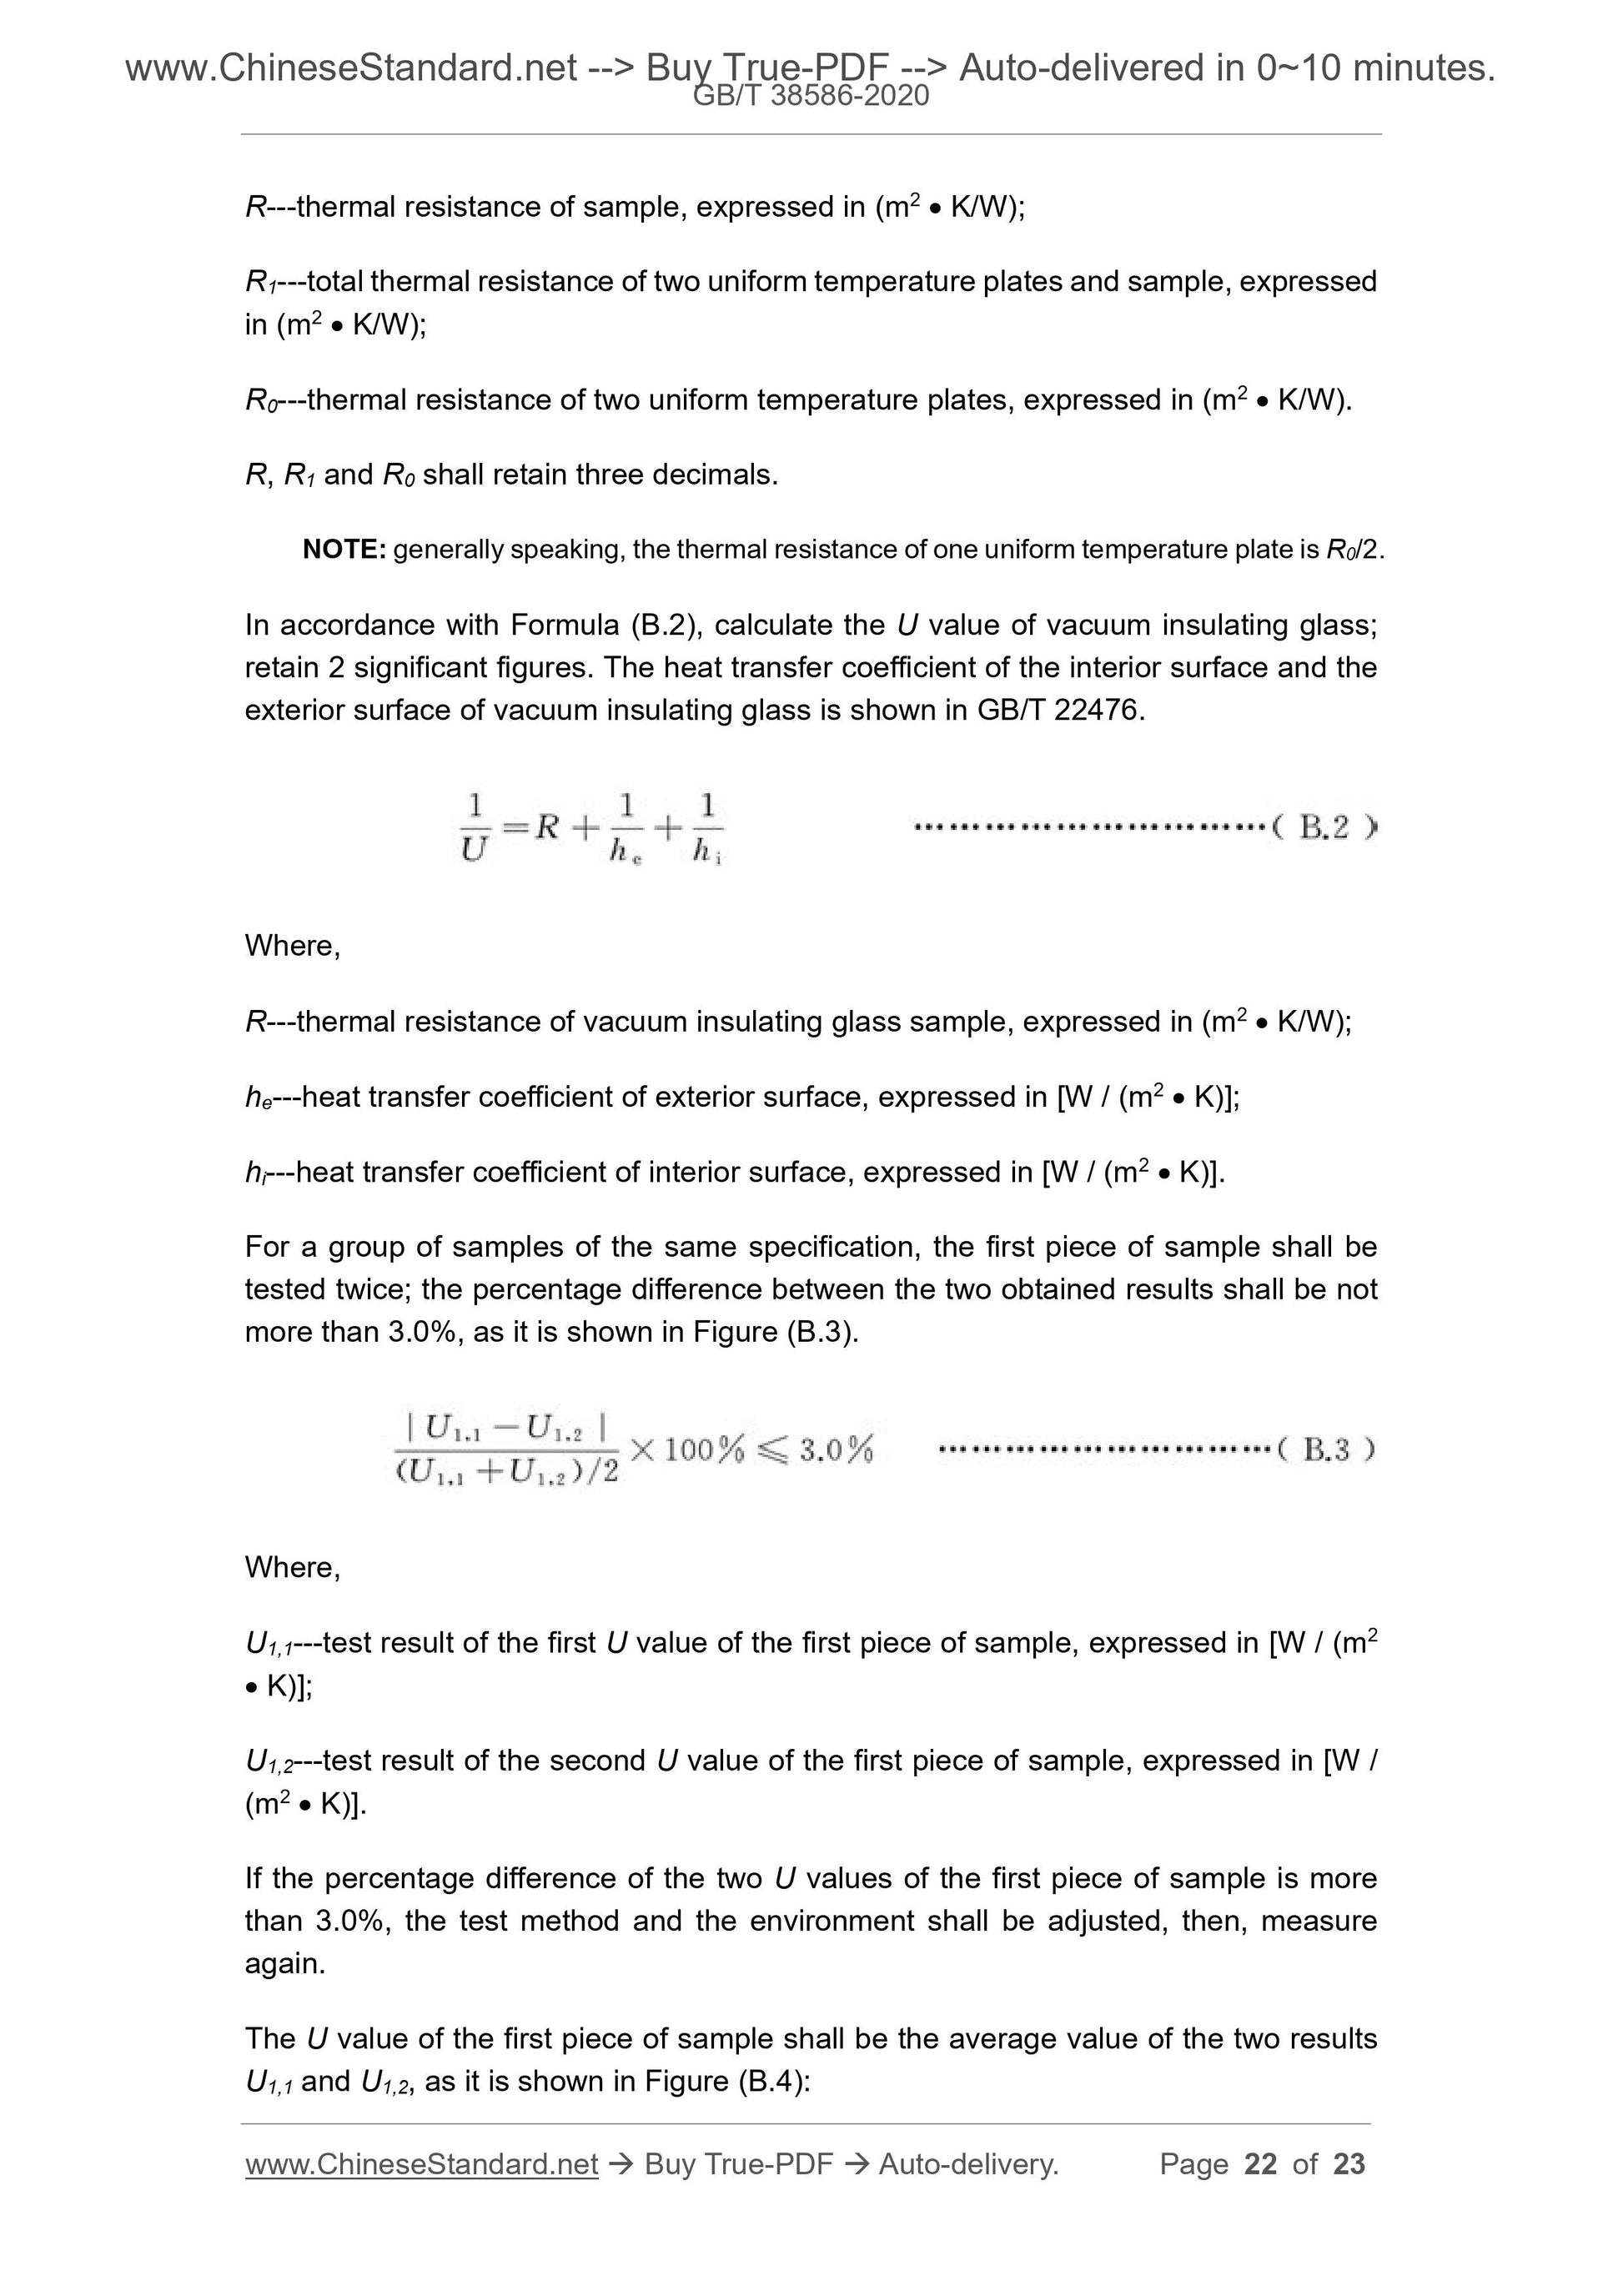 GB/T 38586-2020 Page 9